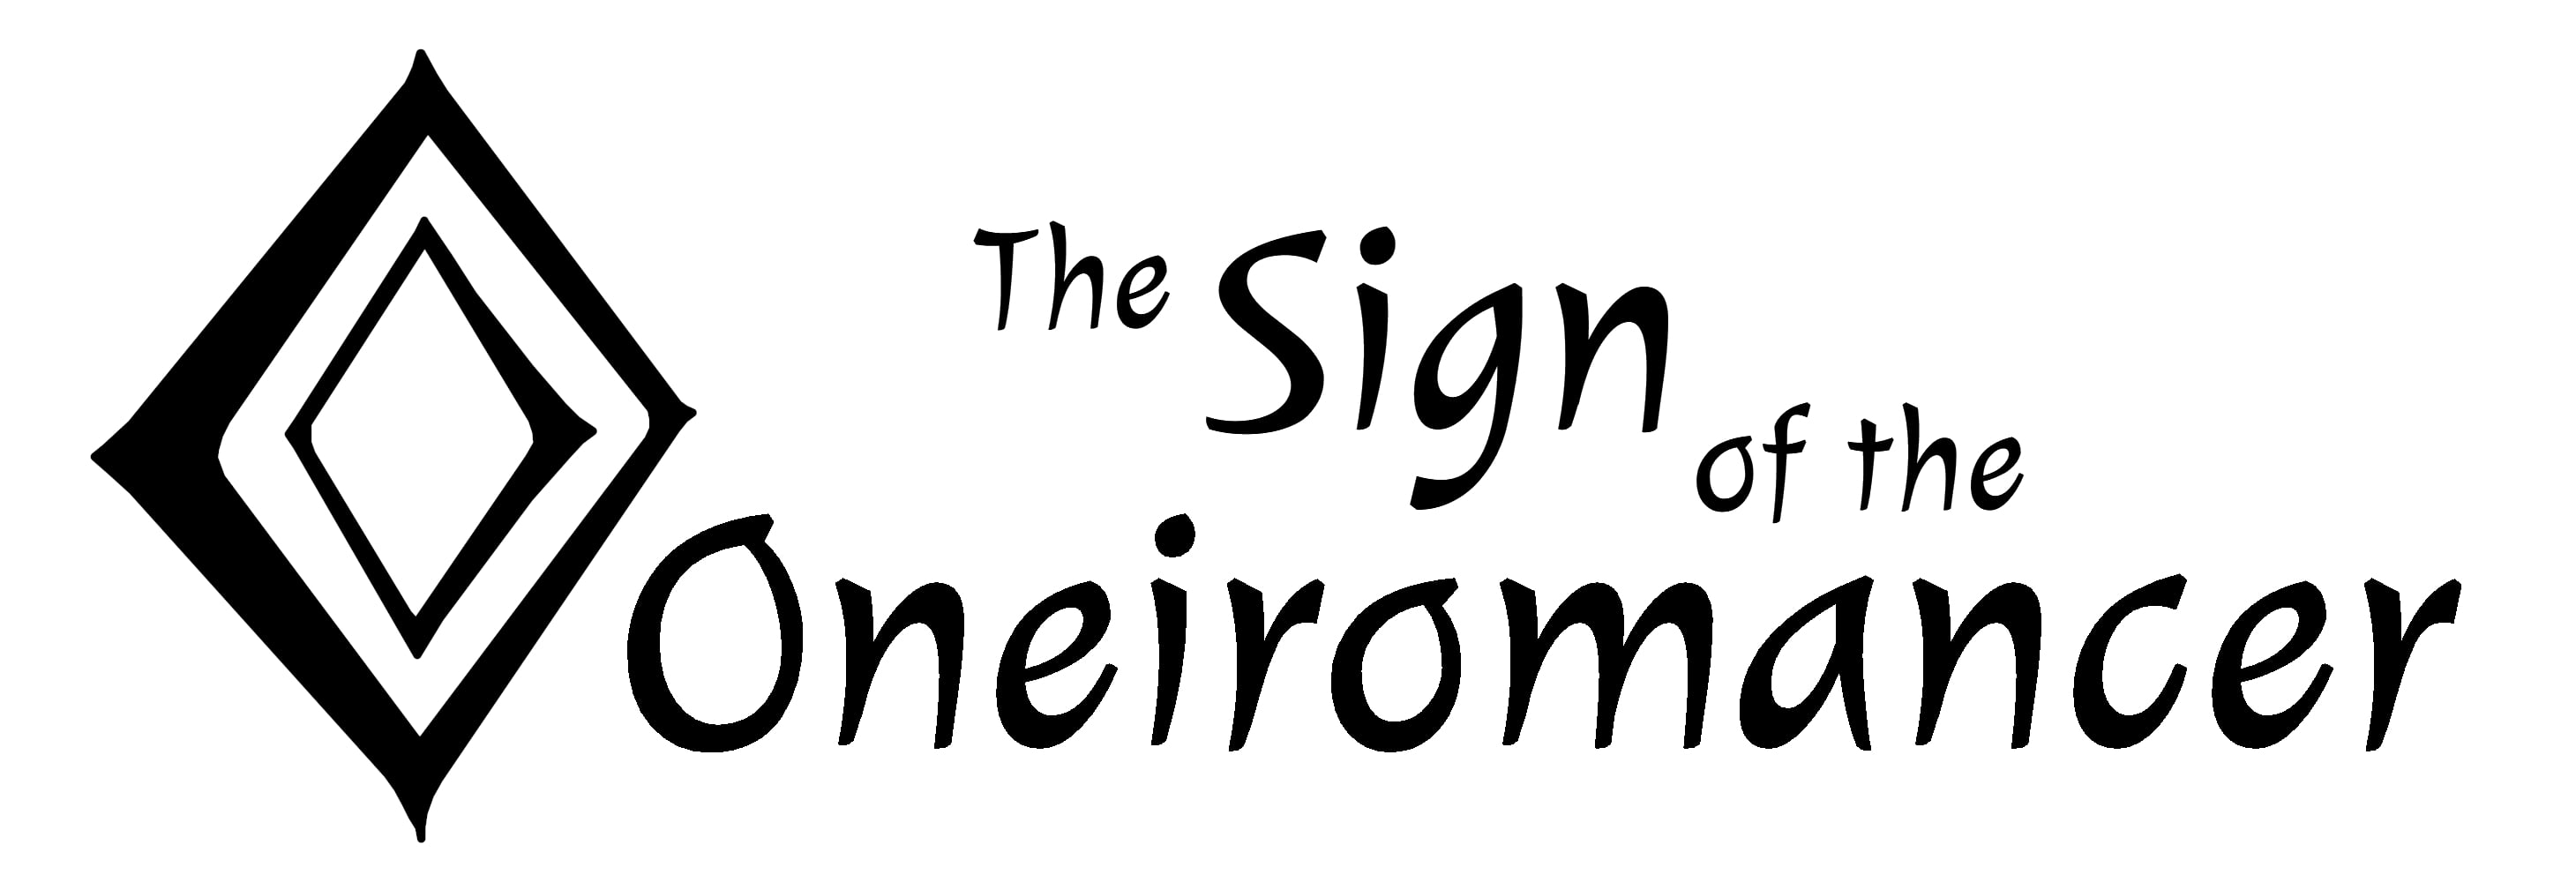 The Sign of the Oneiromancer